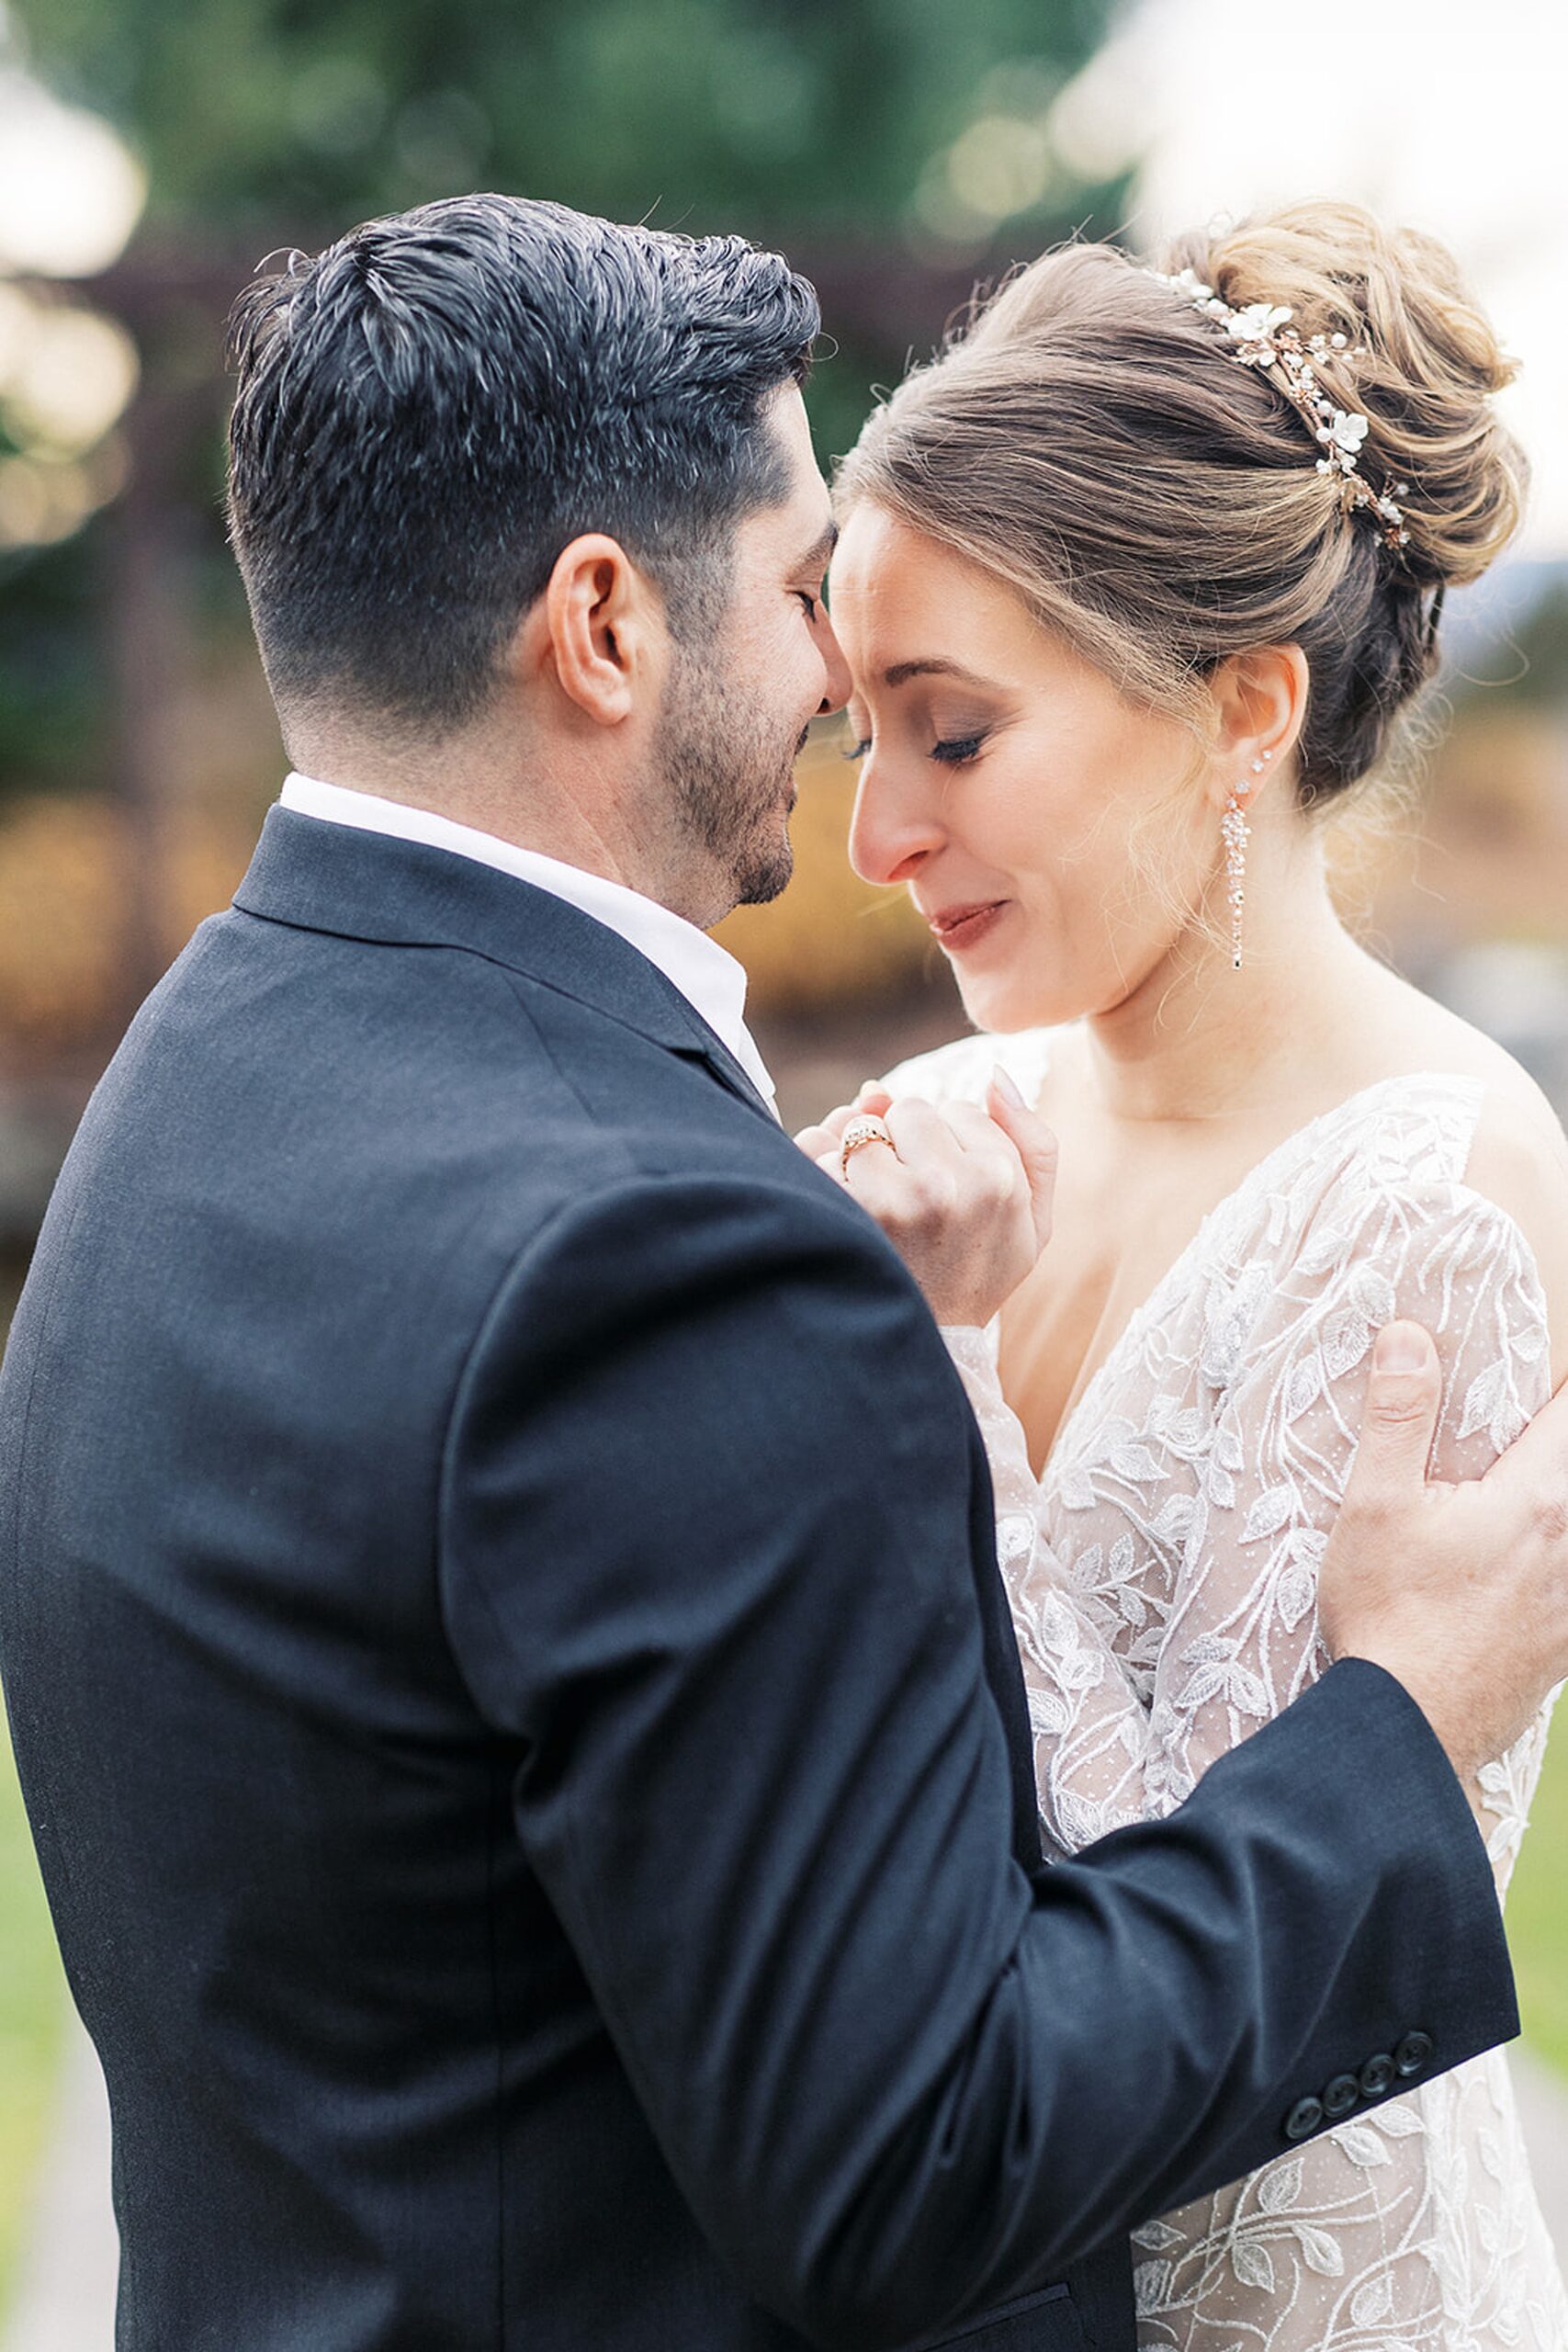 Newlyweds embrace and nuzzle while standing in a garden